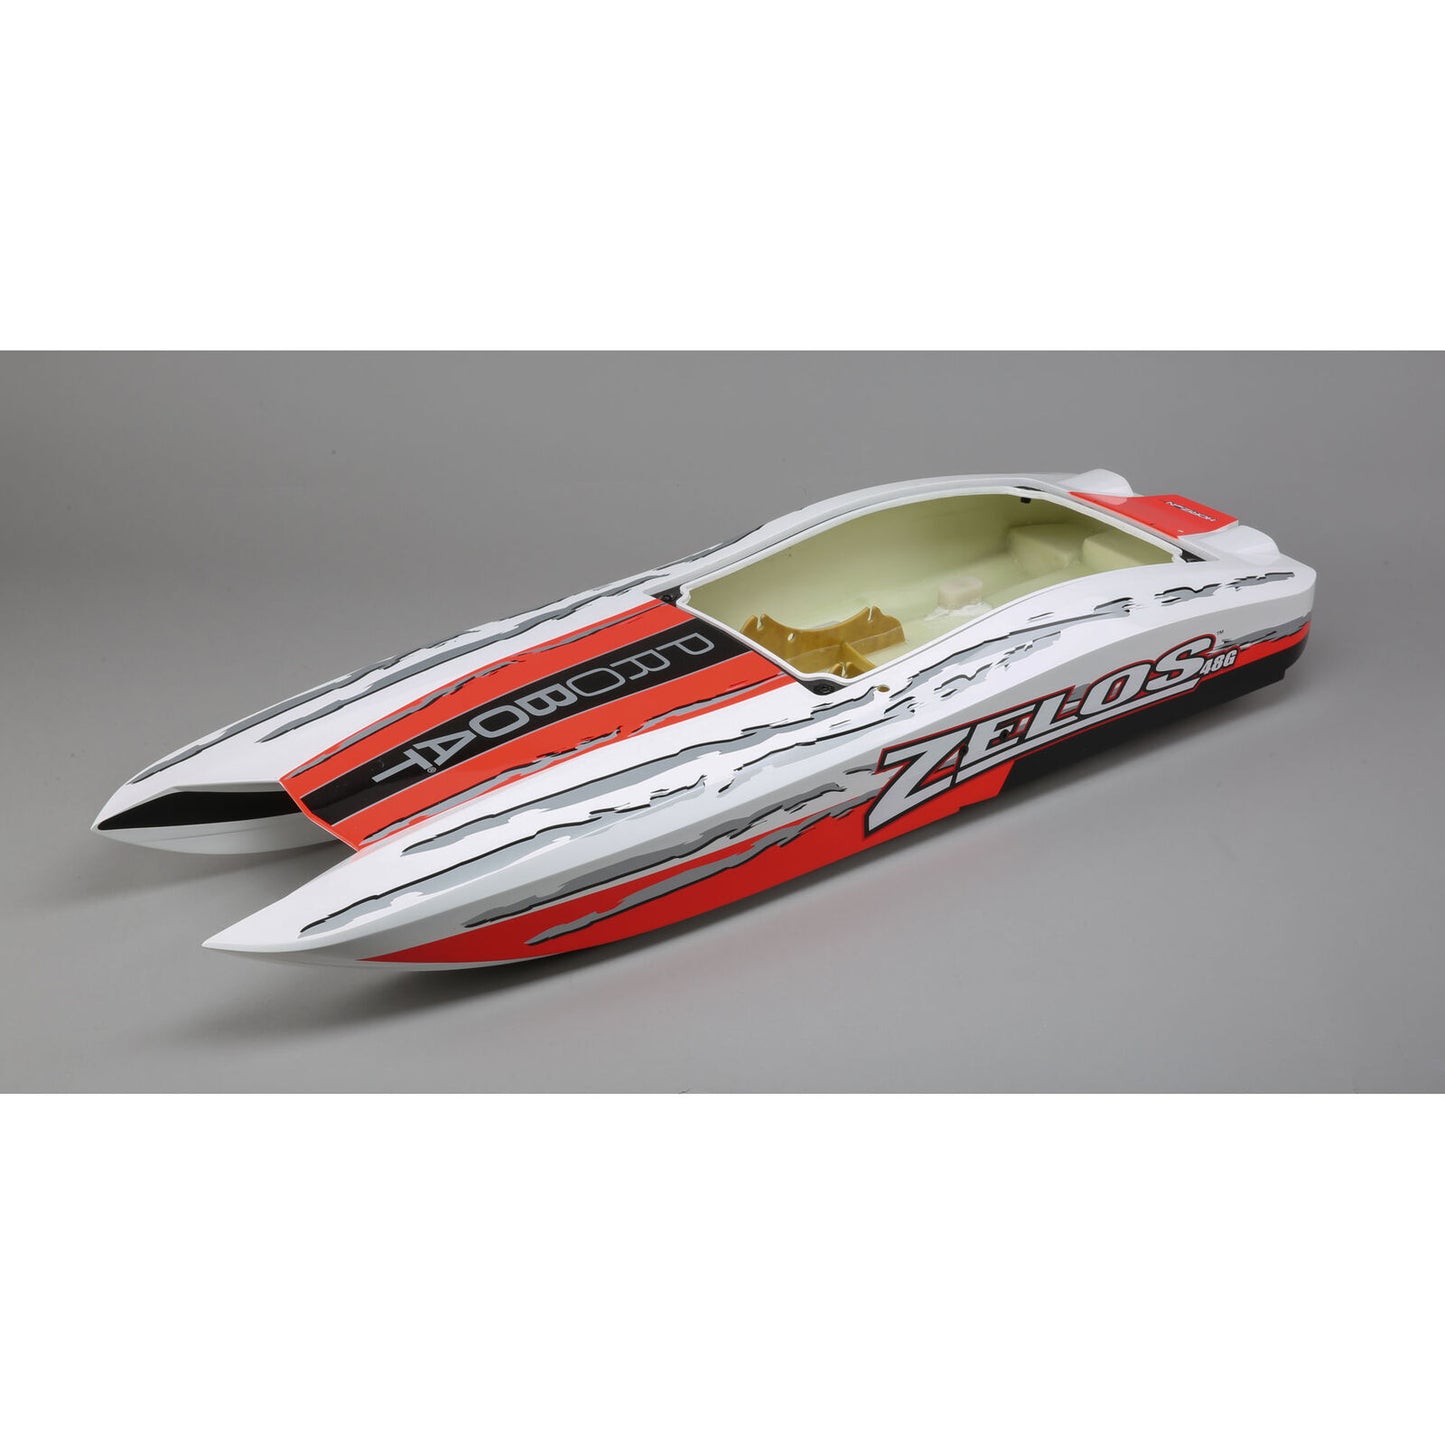 PRB281049    Zelos G 48" Gas Powered Catamaran  HULL ONLY  W/ CANOPY included   ($100 shipping included plus $14 handling )